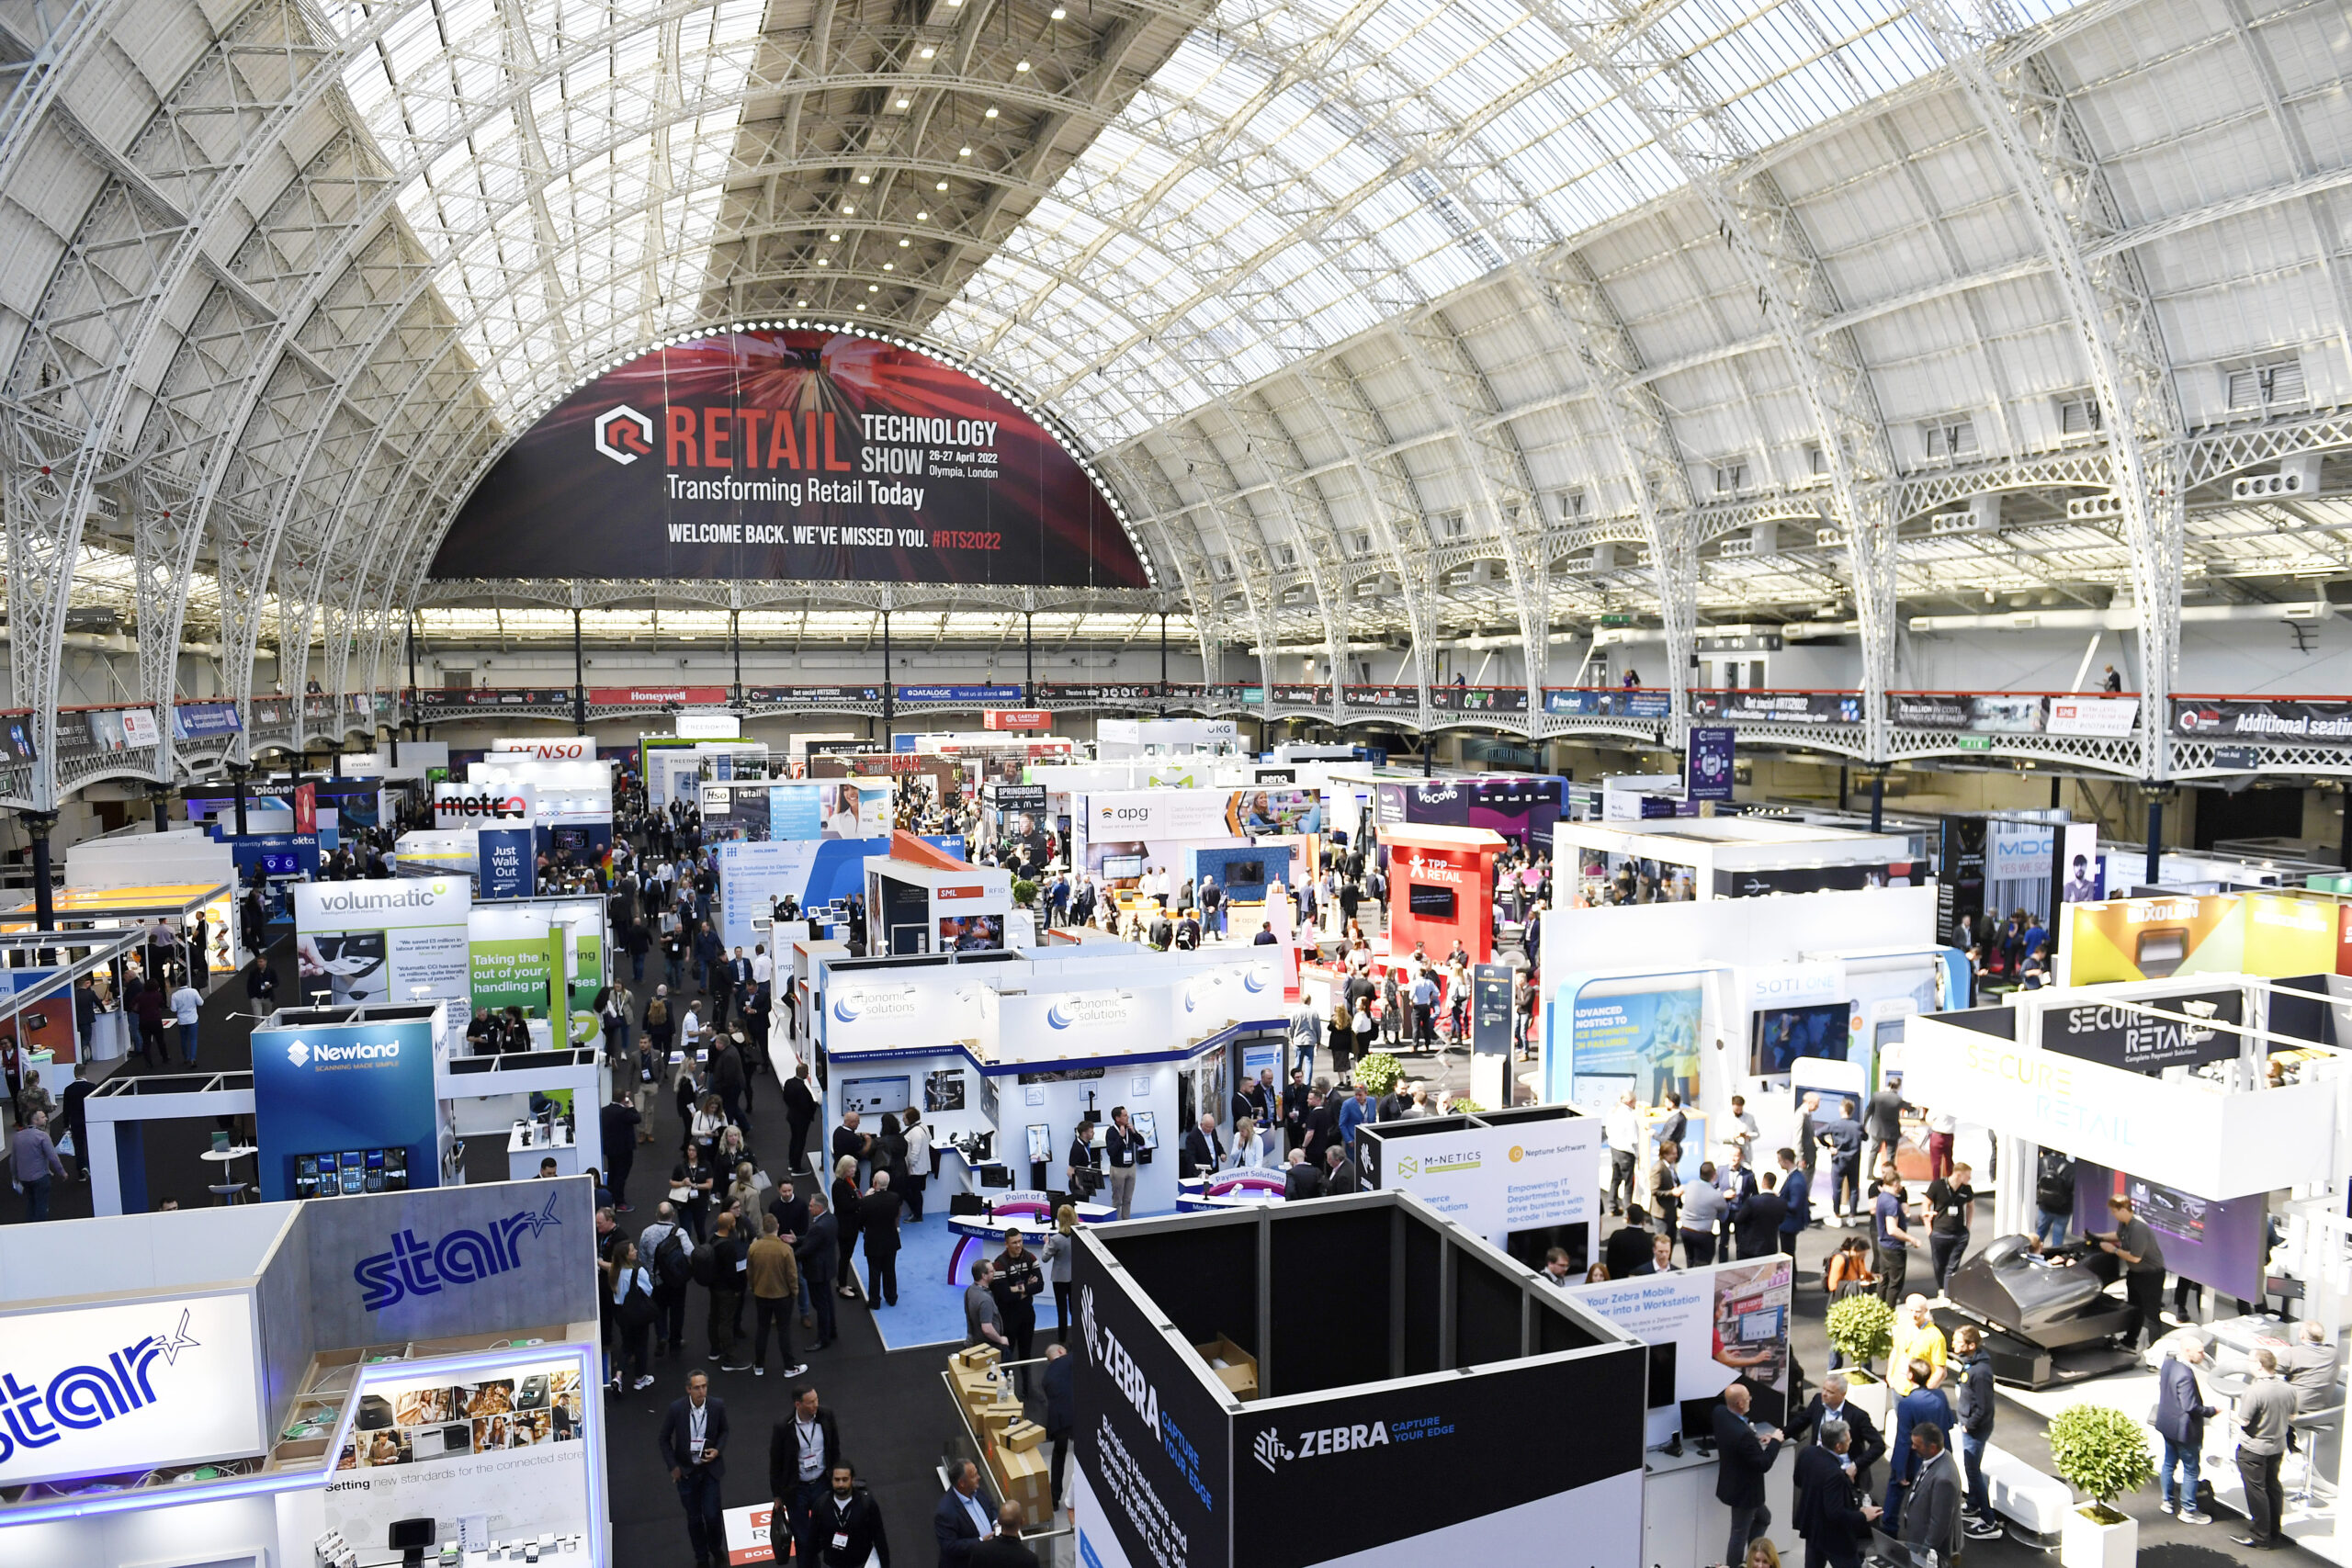 Retail Technology Show 2023, 26-27th April 2023 at Olympia, London - Trade Show and Exhibition